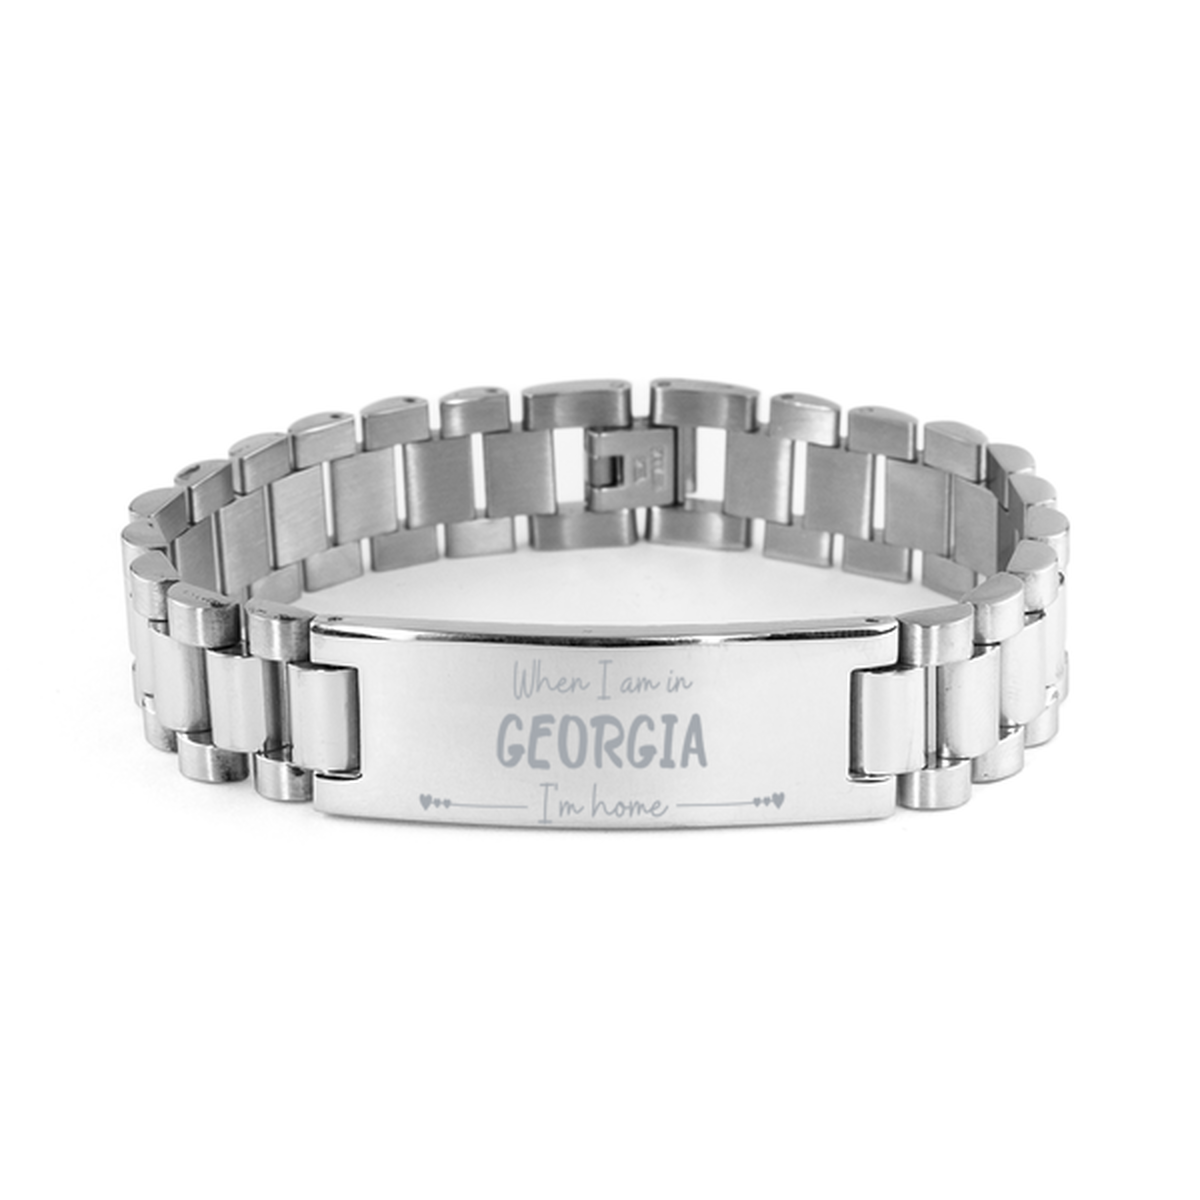 When I am in Georgia I'm home Ladder Stainless Steel Bracelet, Cheap Gifts For Georgia, State Georgia Birthday Gifts for Friends Coworker